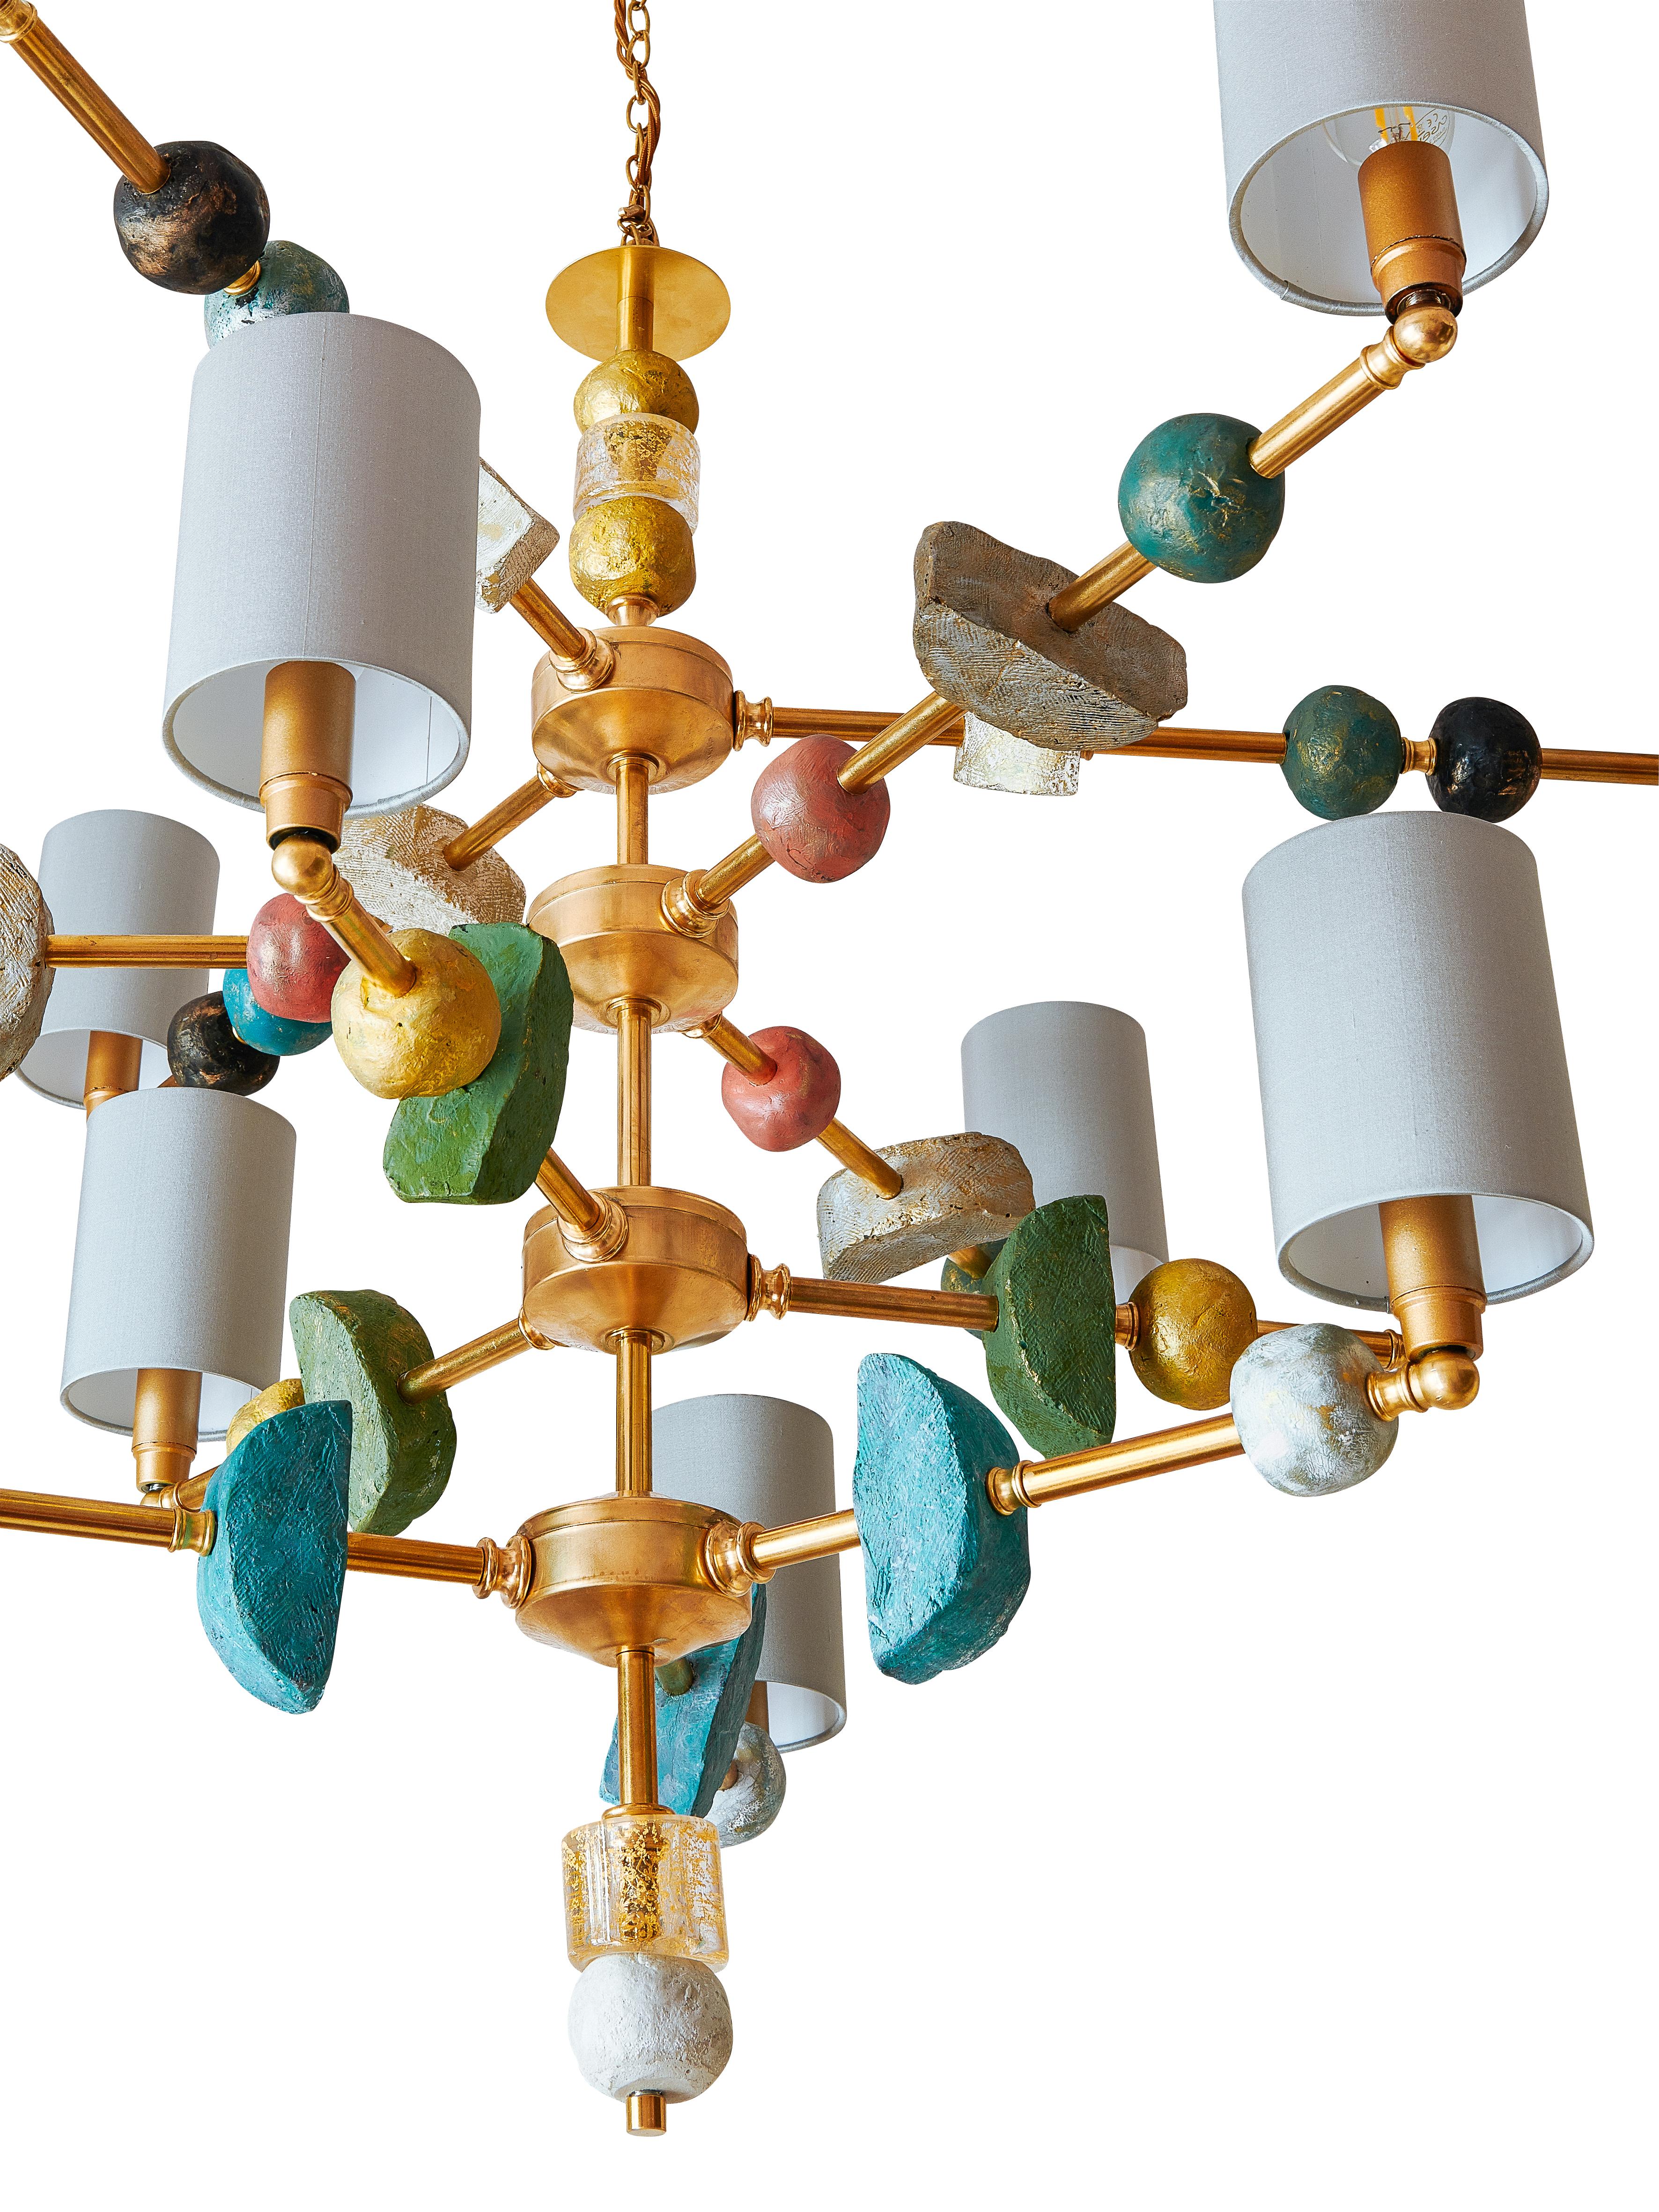 This contemporary 21st century four-tier, twelve arm chandelier by Margit Wittig features sculptural components with organic and subtle textures, all shapes are cast individually and treated with multiple layers of patina in her London studio. The